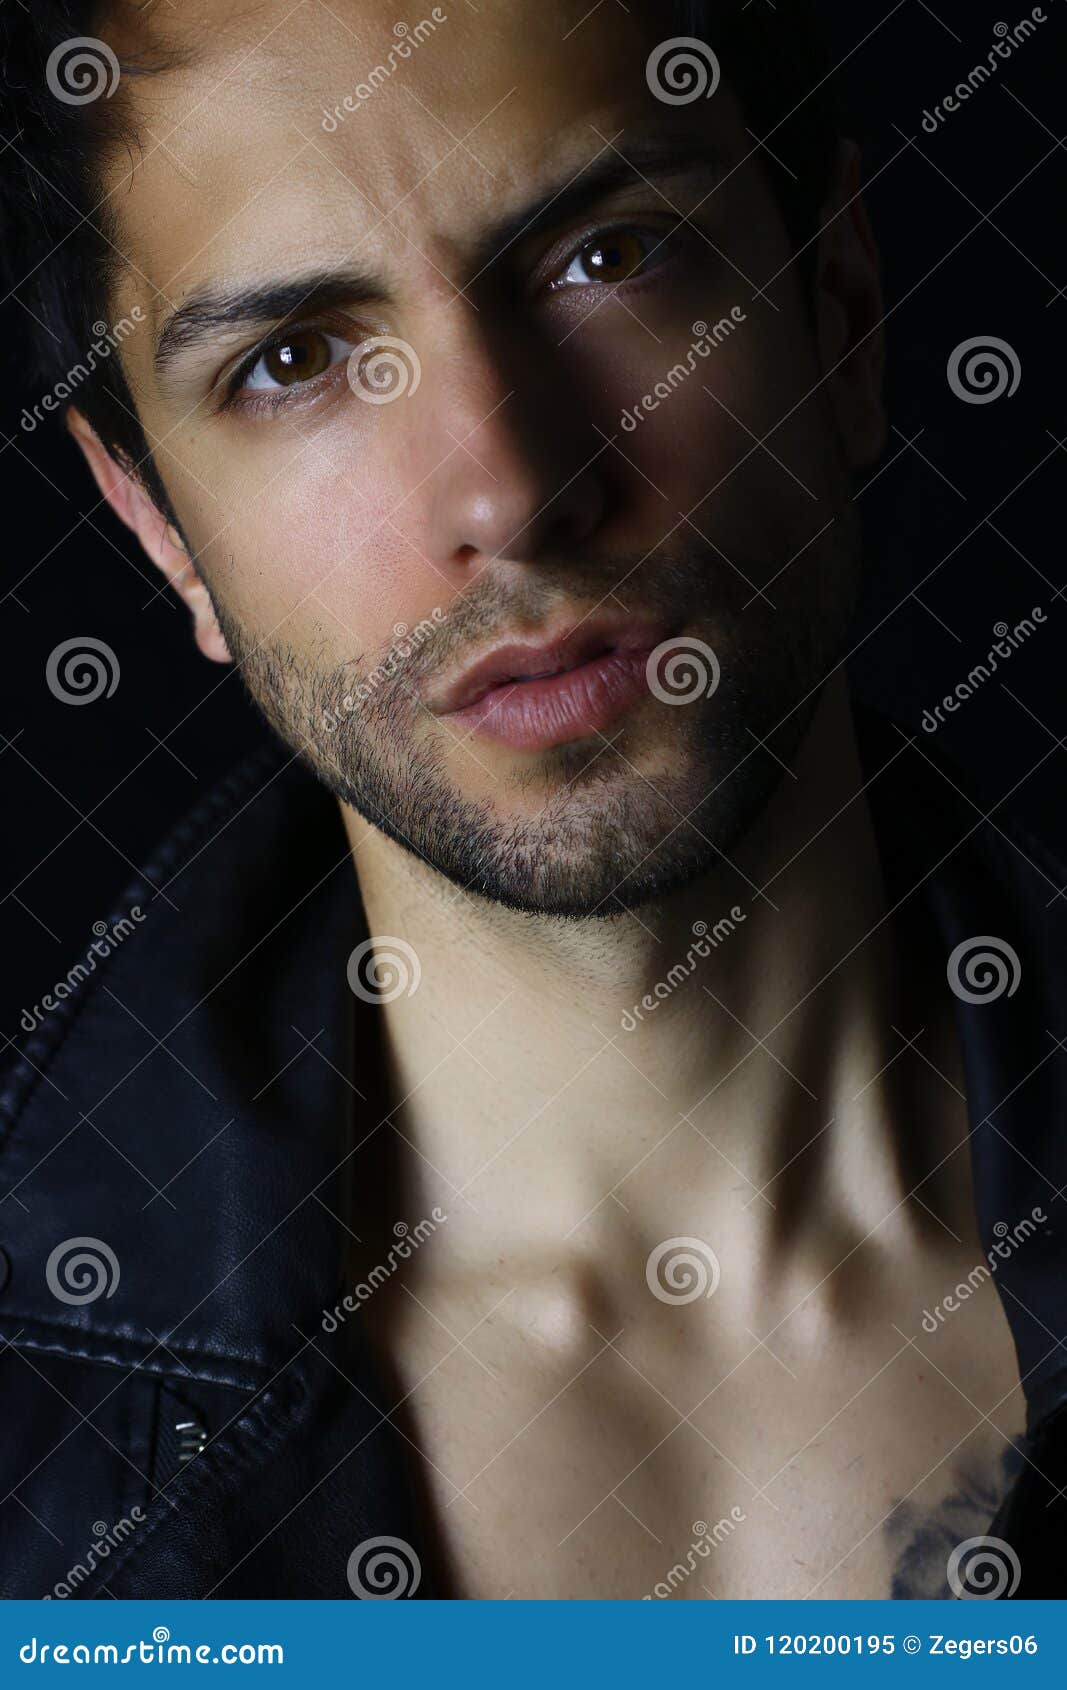 Reproduce picture on black background with soft light on face only   Photography Stack Exchange  Portrait Black background photography Black  background portrait